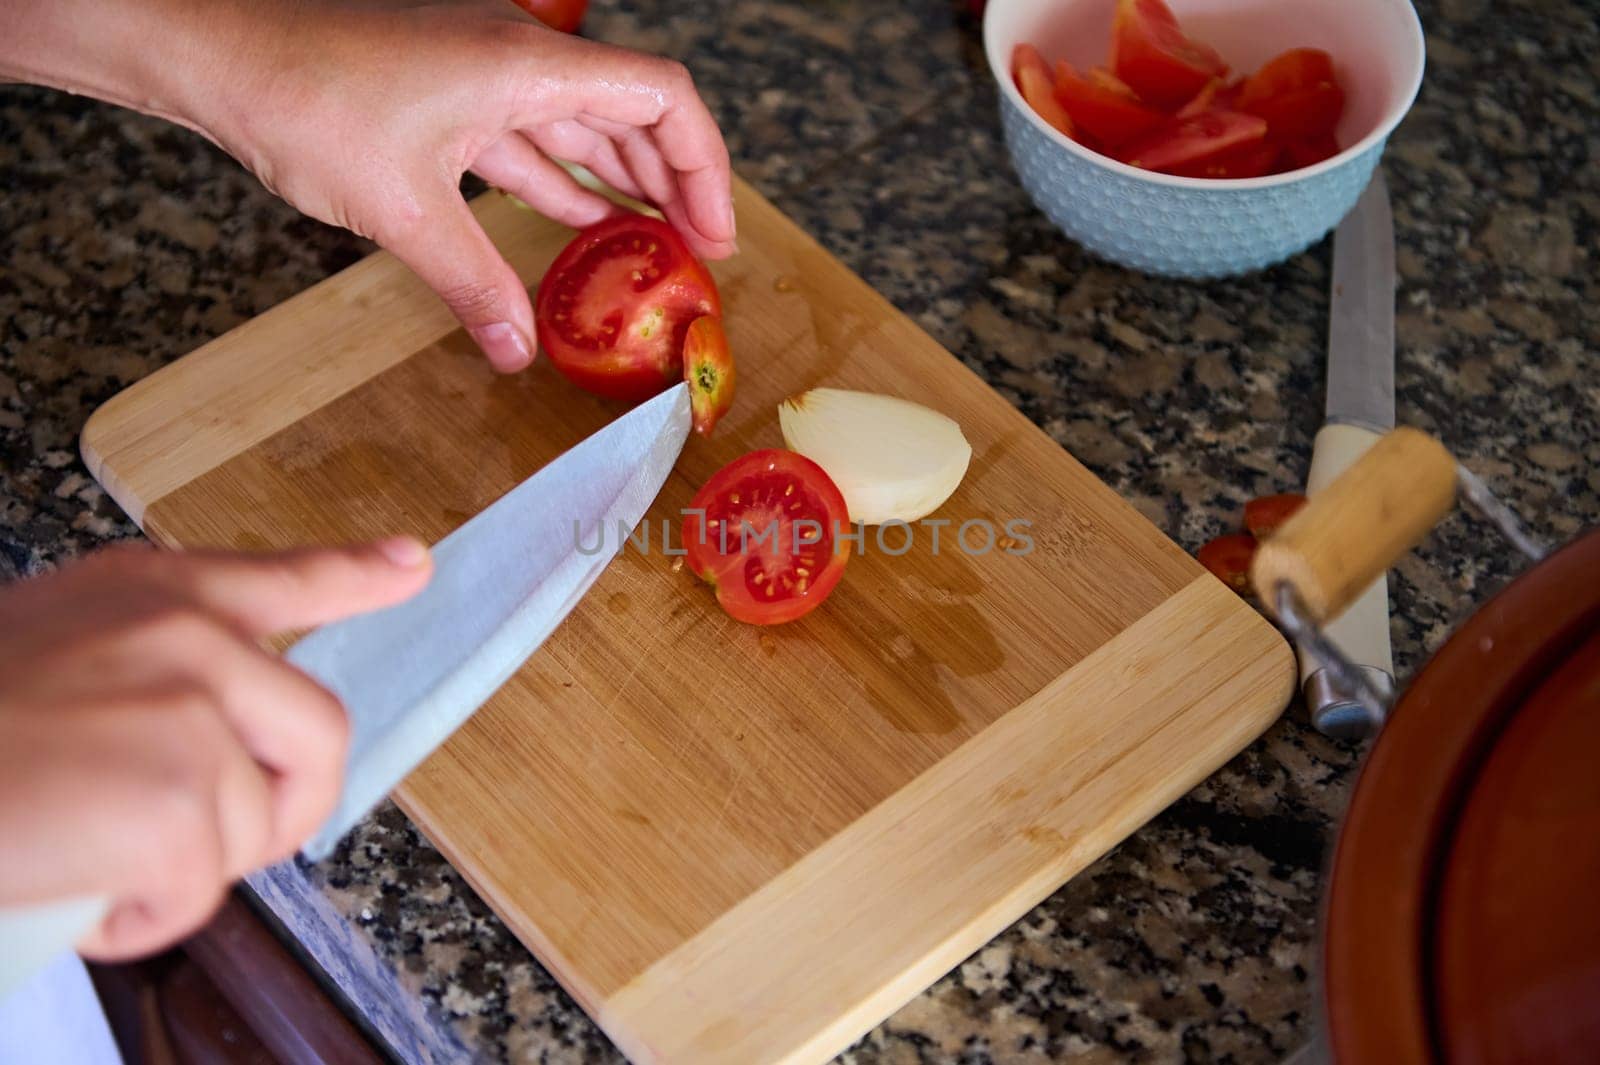 Top view of chef's hands using a kitchen knife, cutting fresh ripe organic tomatoes on a wooden board. Cook prepares a healthy salad